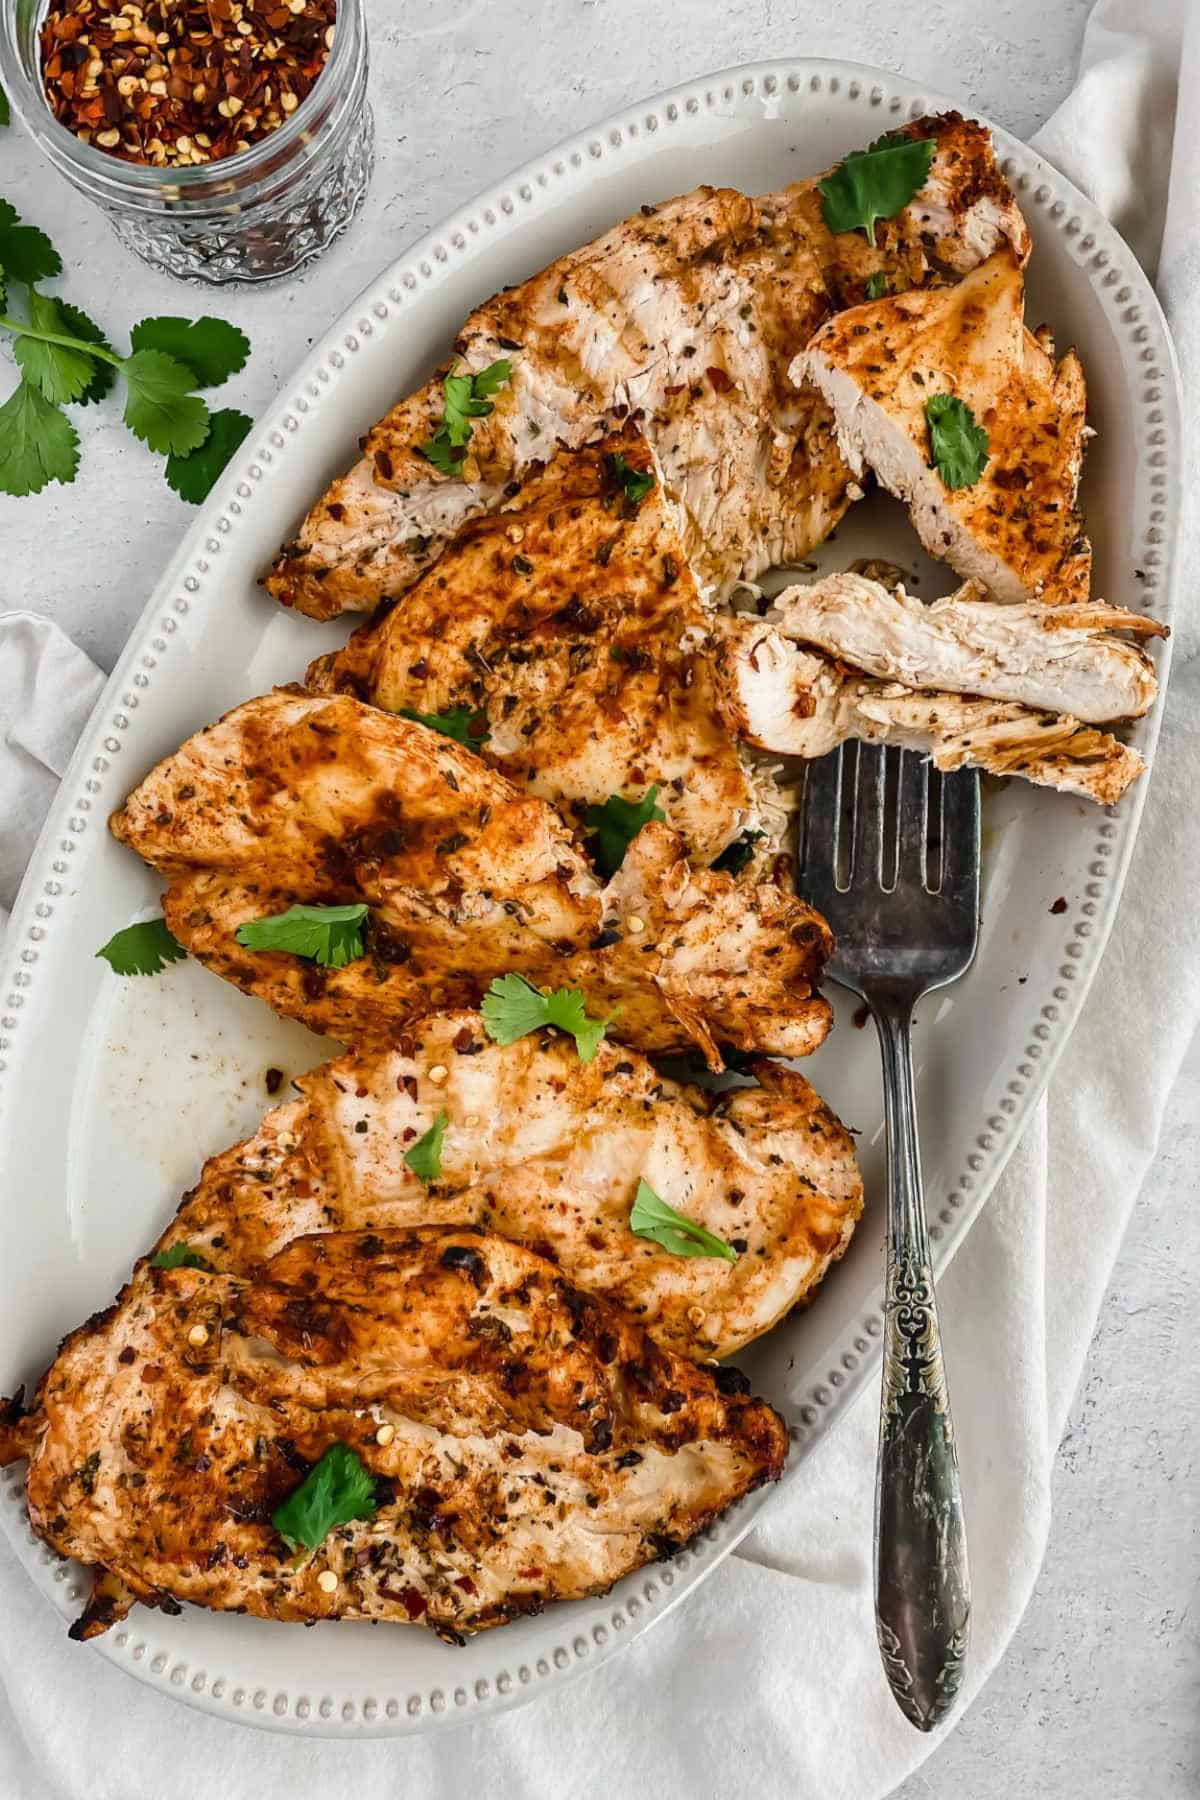 Close up image of grilled chicken on an oval plate with a fork.